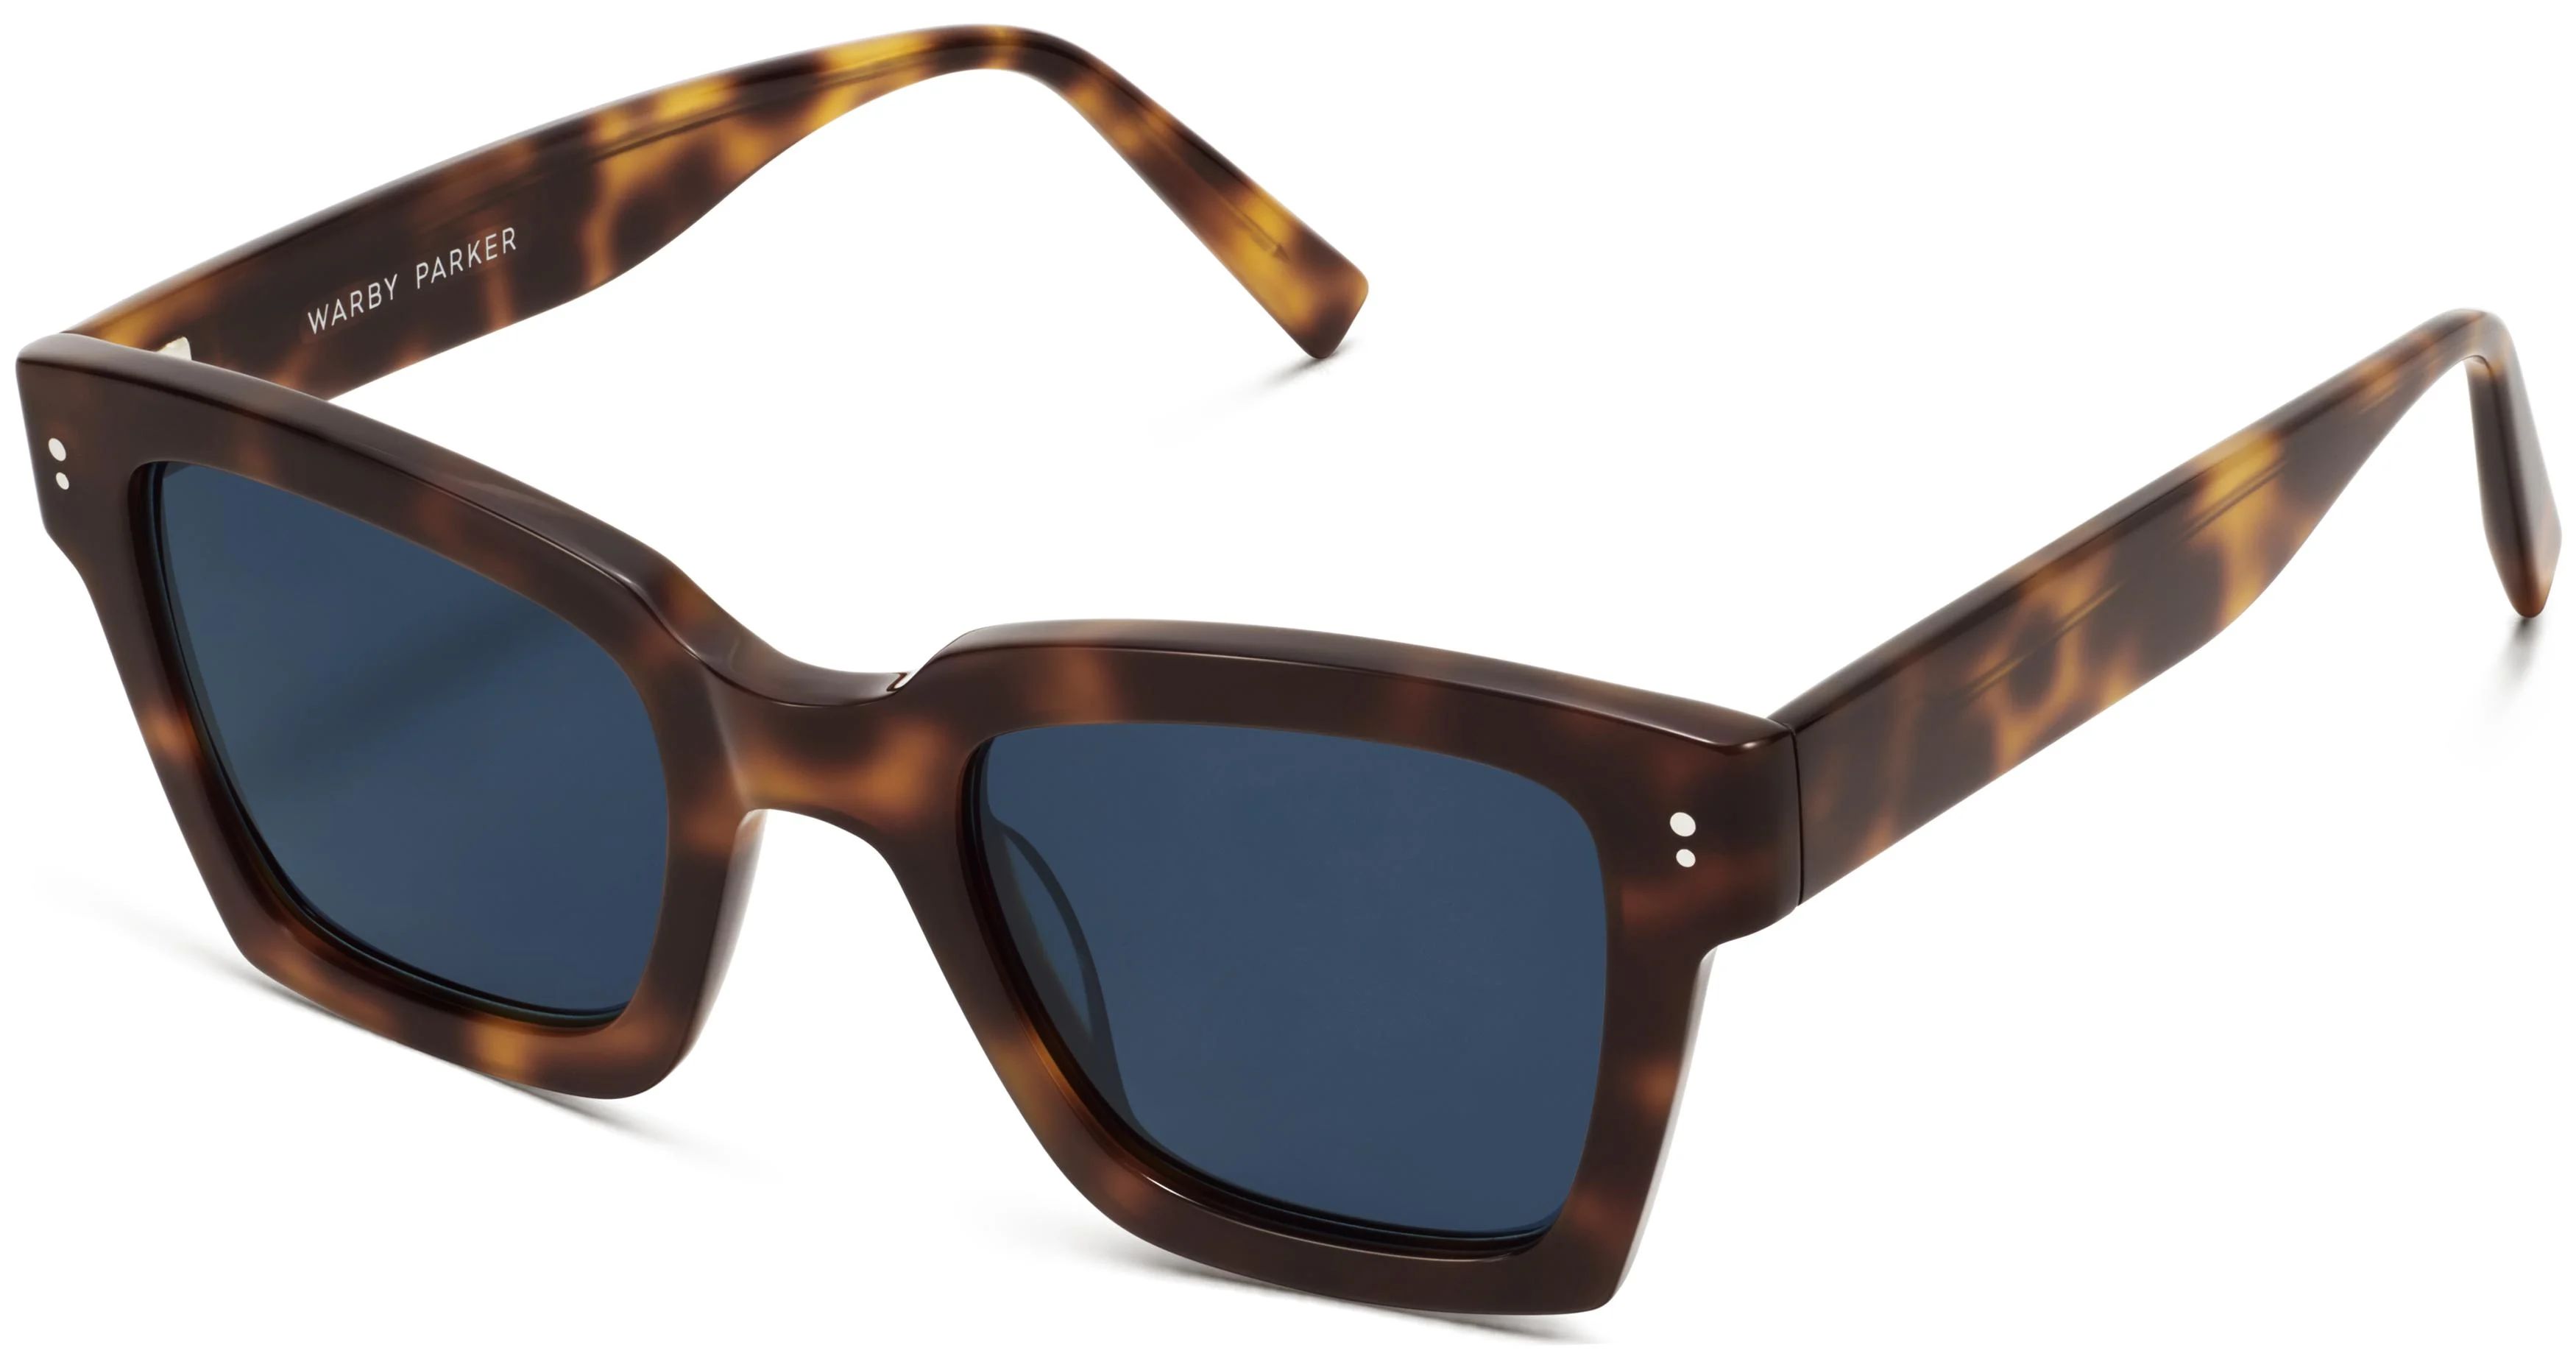 Sonia Sunglasses in Aventurine Tortoise Fade | Warby Parker | Warby Parker (US)